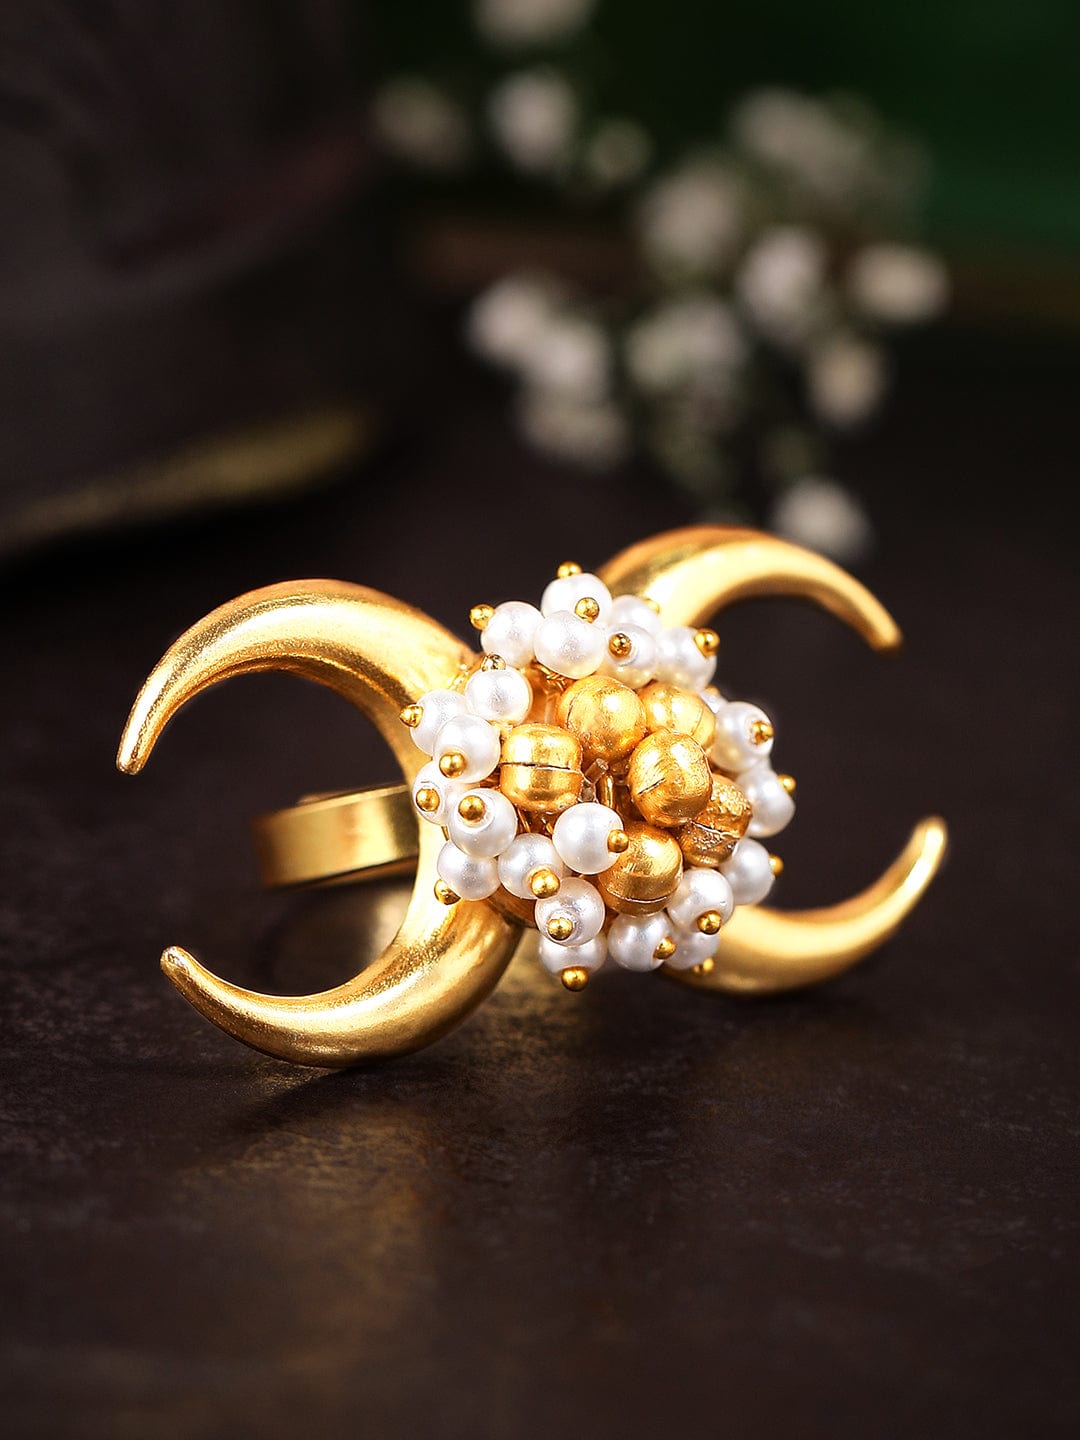 Rubans 24K Gold Plated Ring With Pearls, Golden Beads And Moon Design Rings